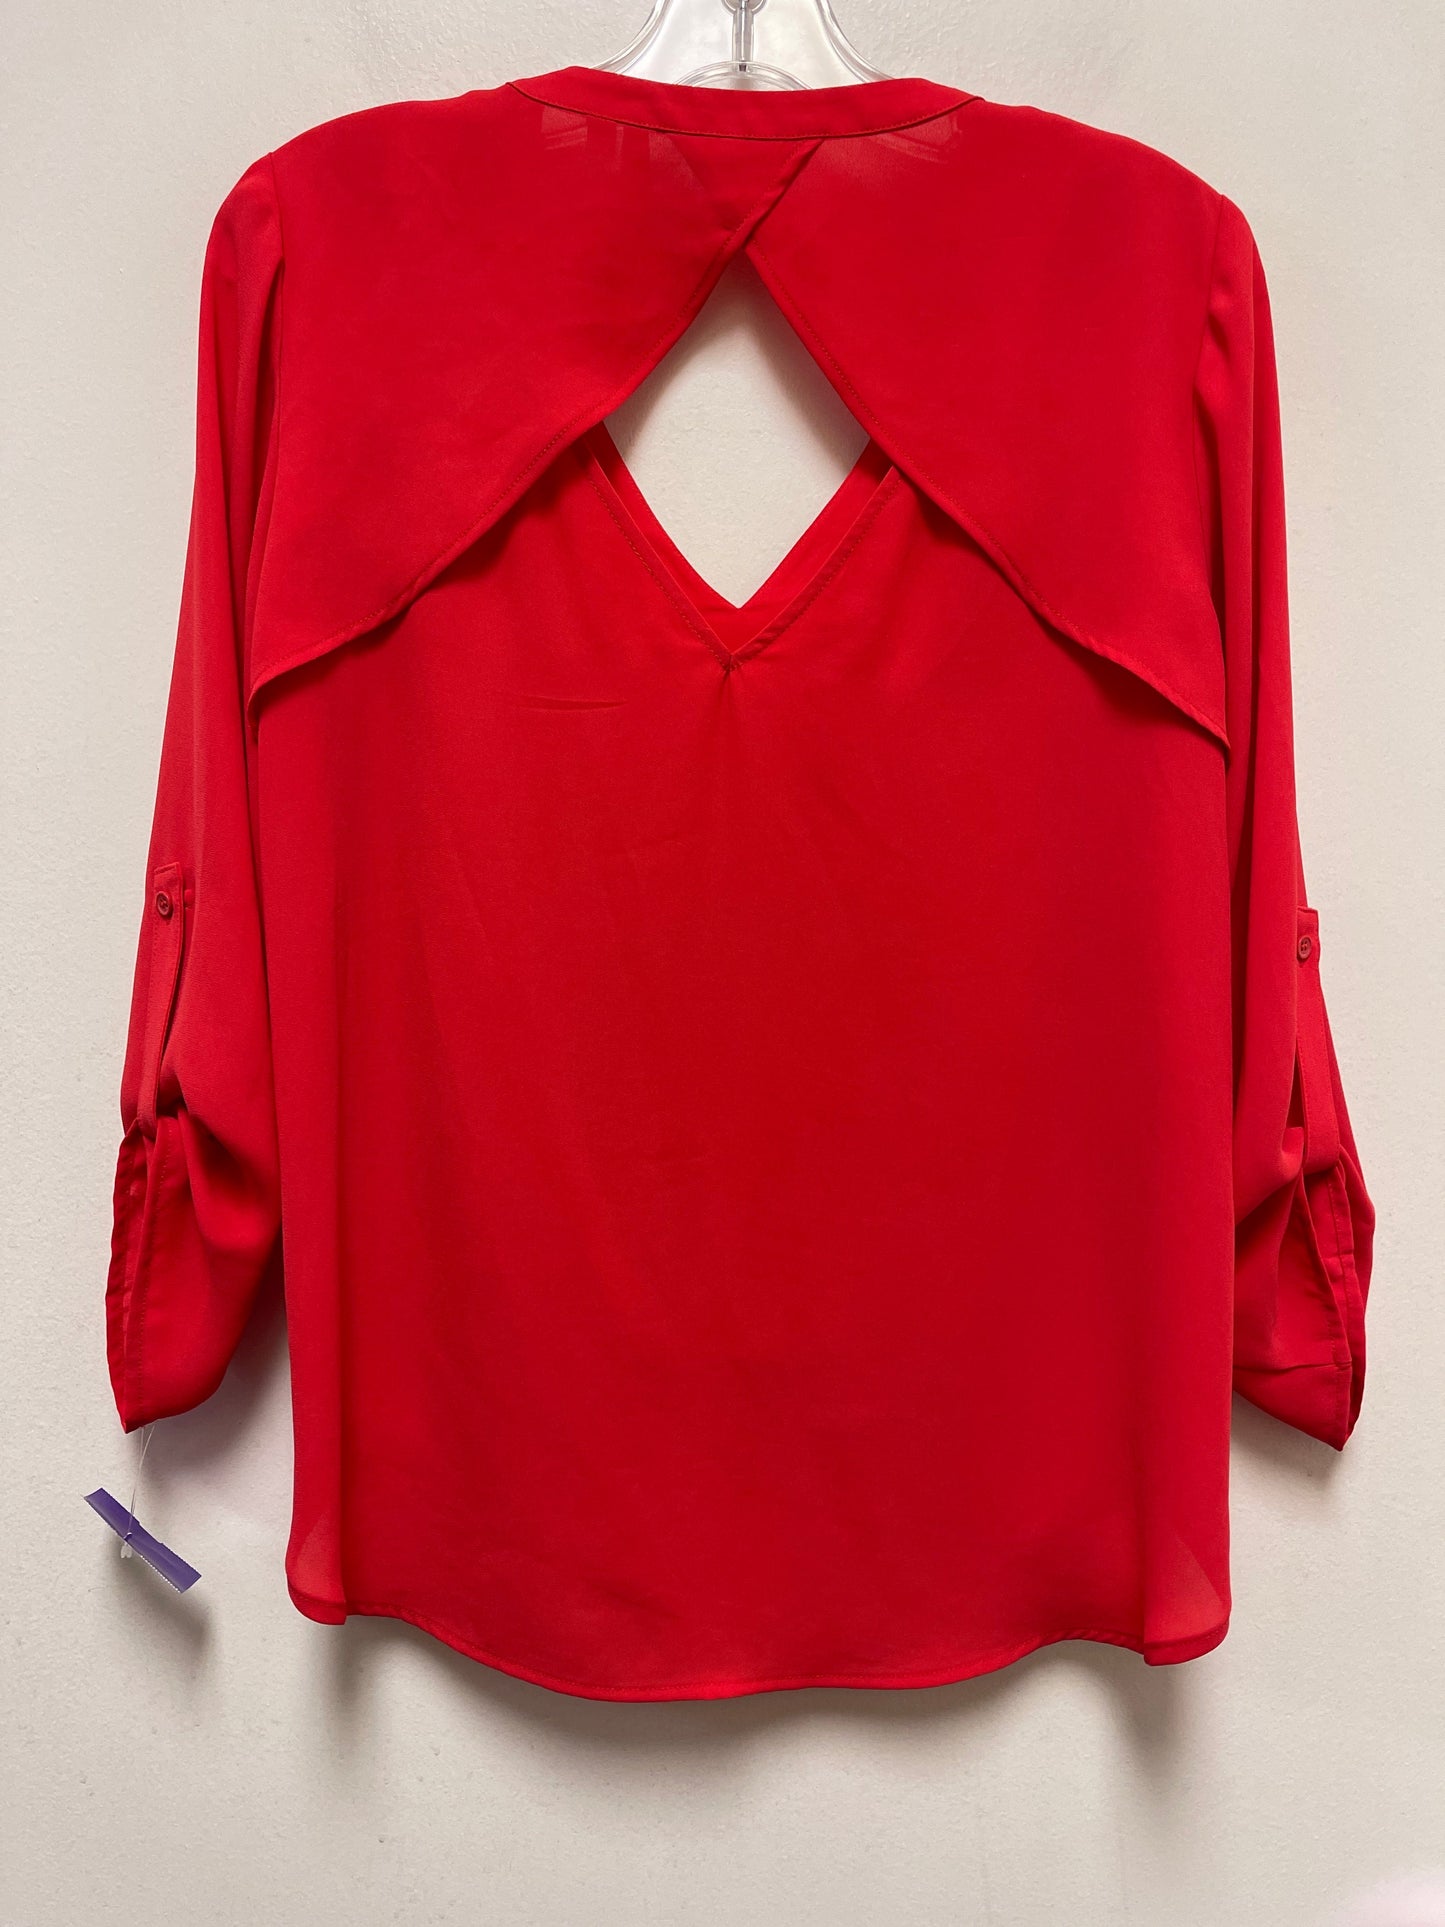 Red Top Long Sleeve Bellatrix, Size S